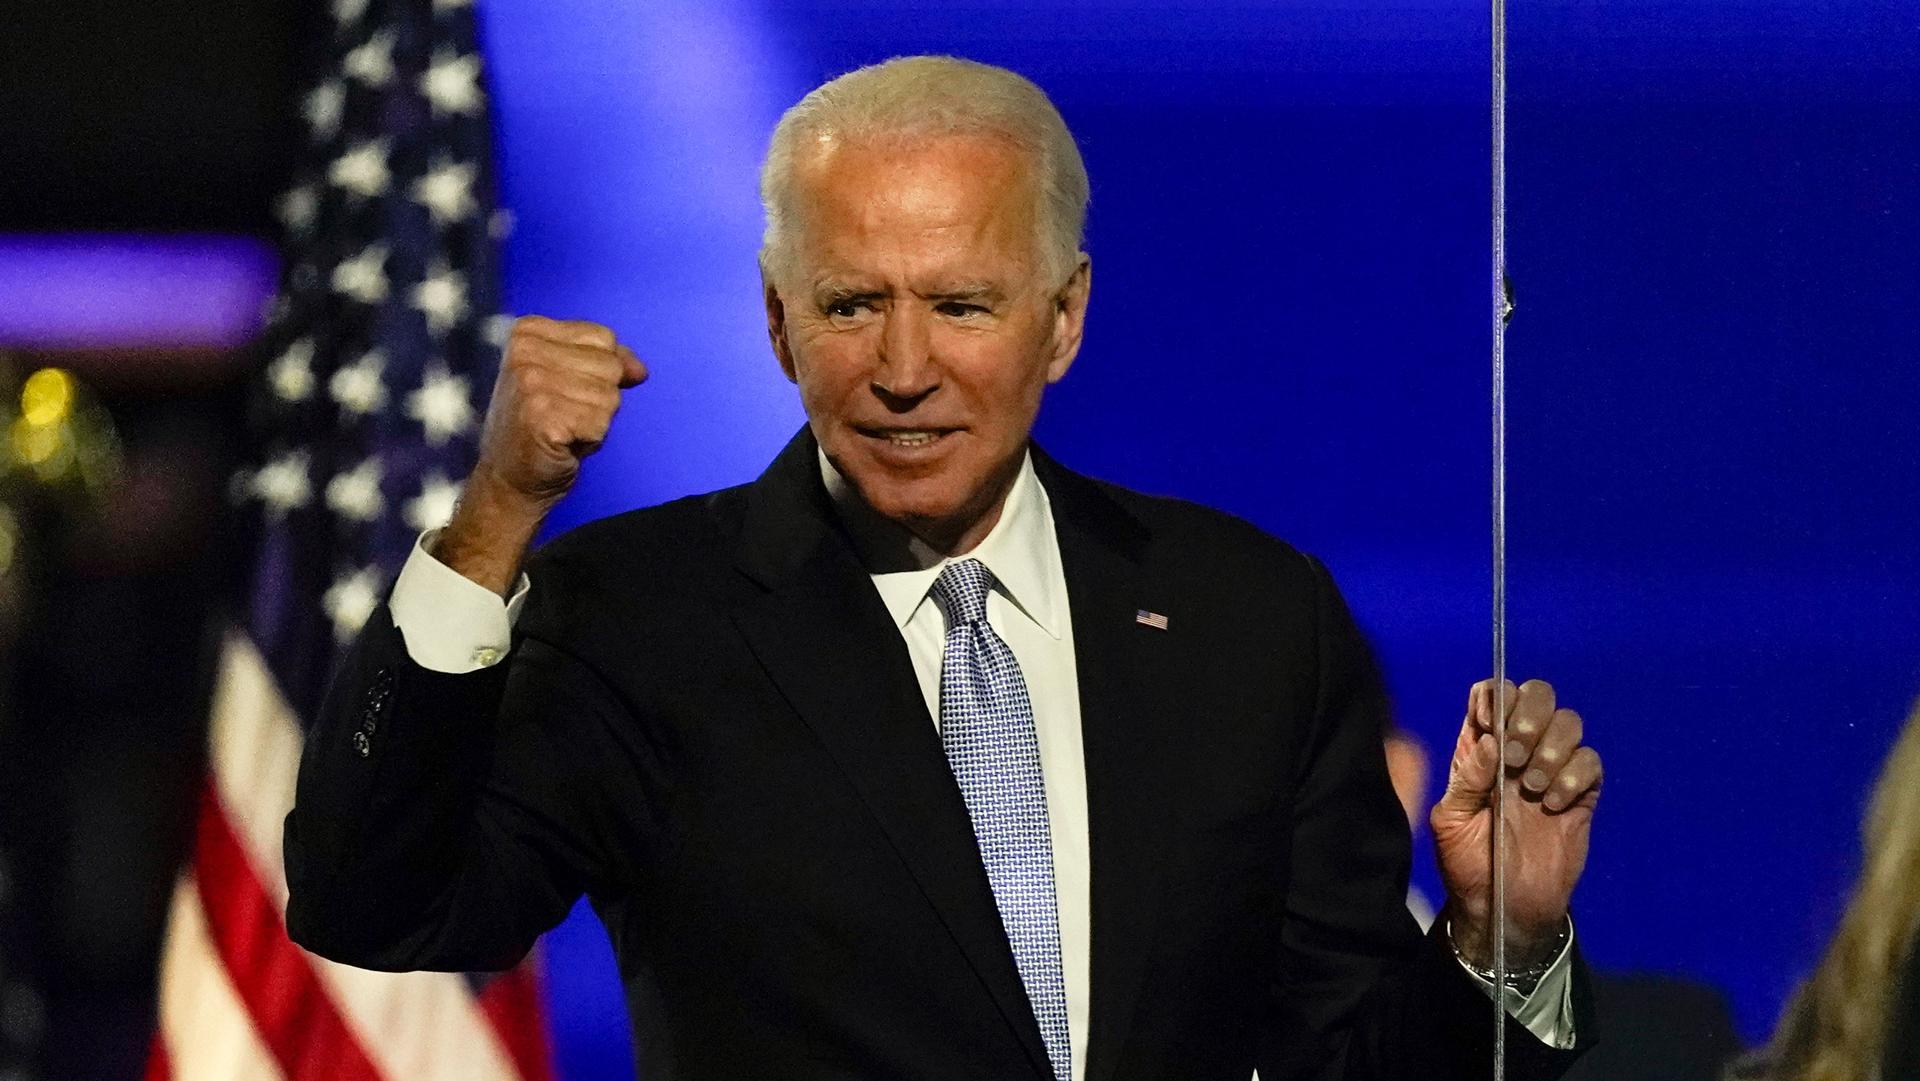 President-elect Joe Biden is shown wearing a dark suit and smiling while holding his fist in the air.